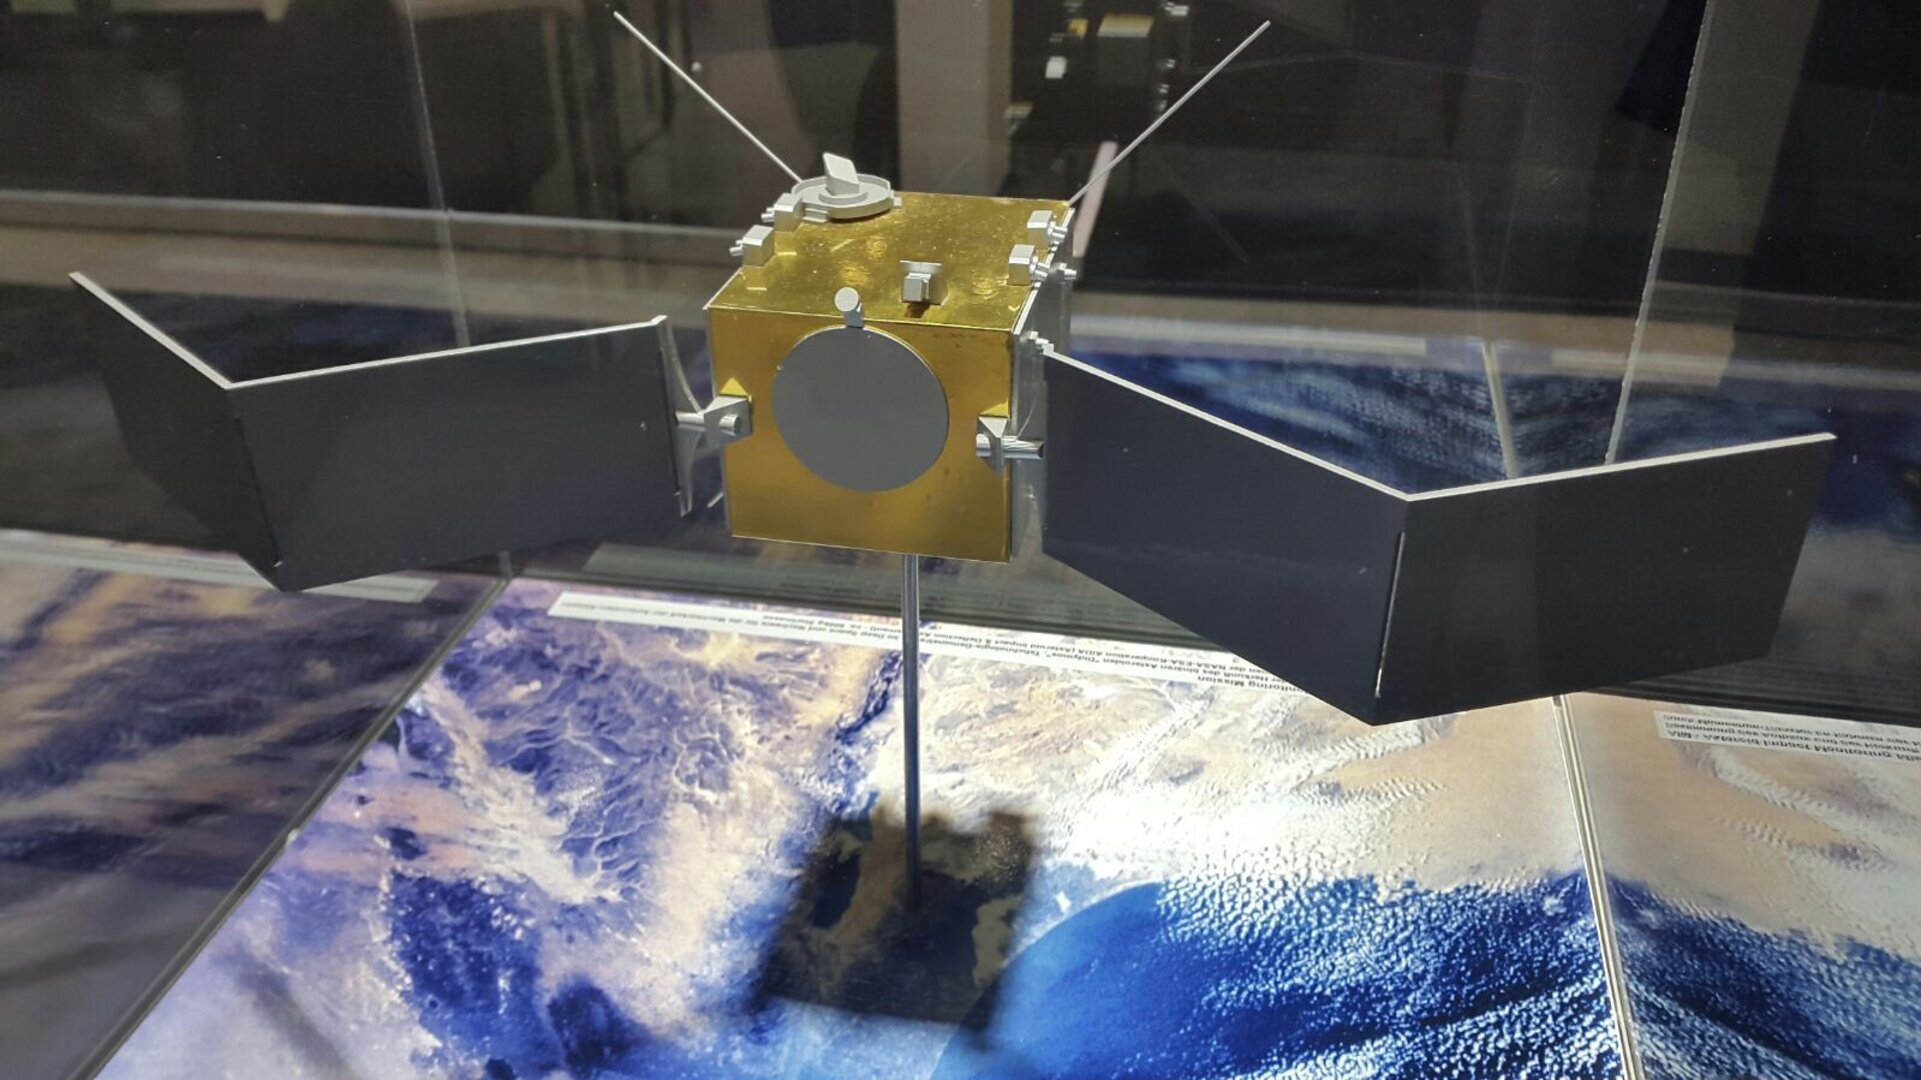 The AIM spacecraft model shown at ILA